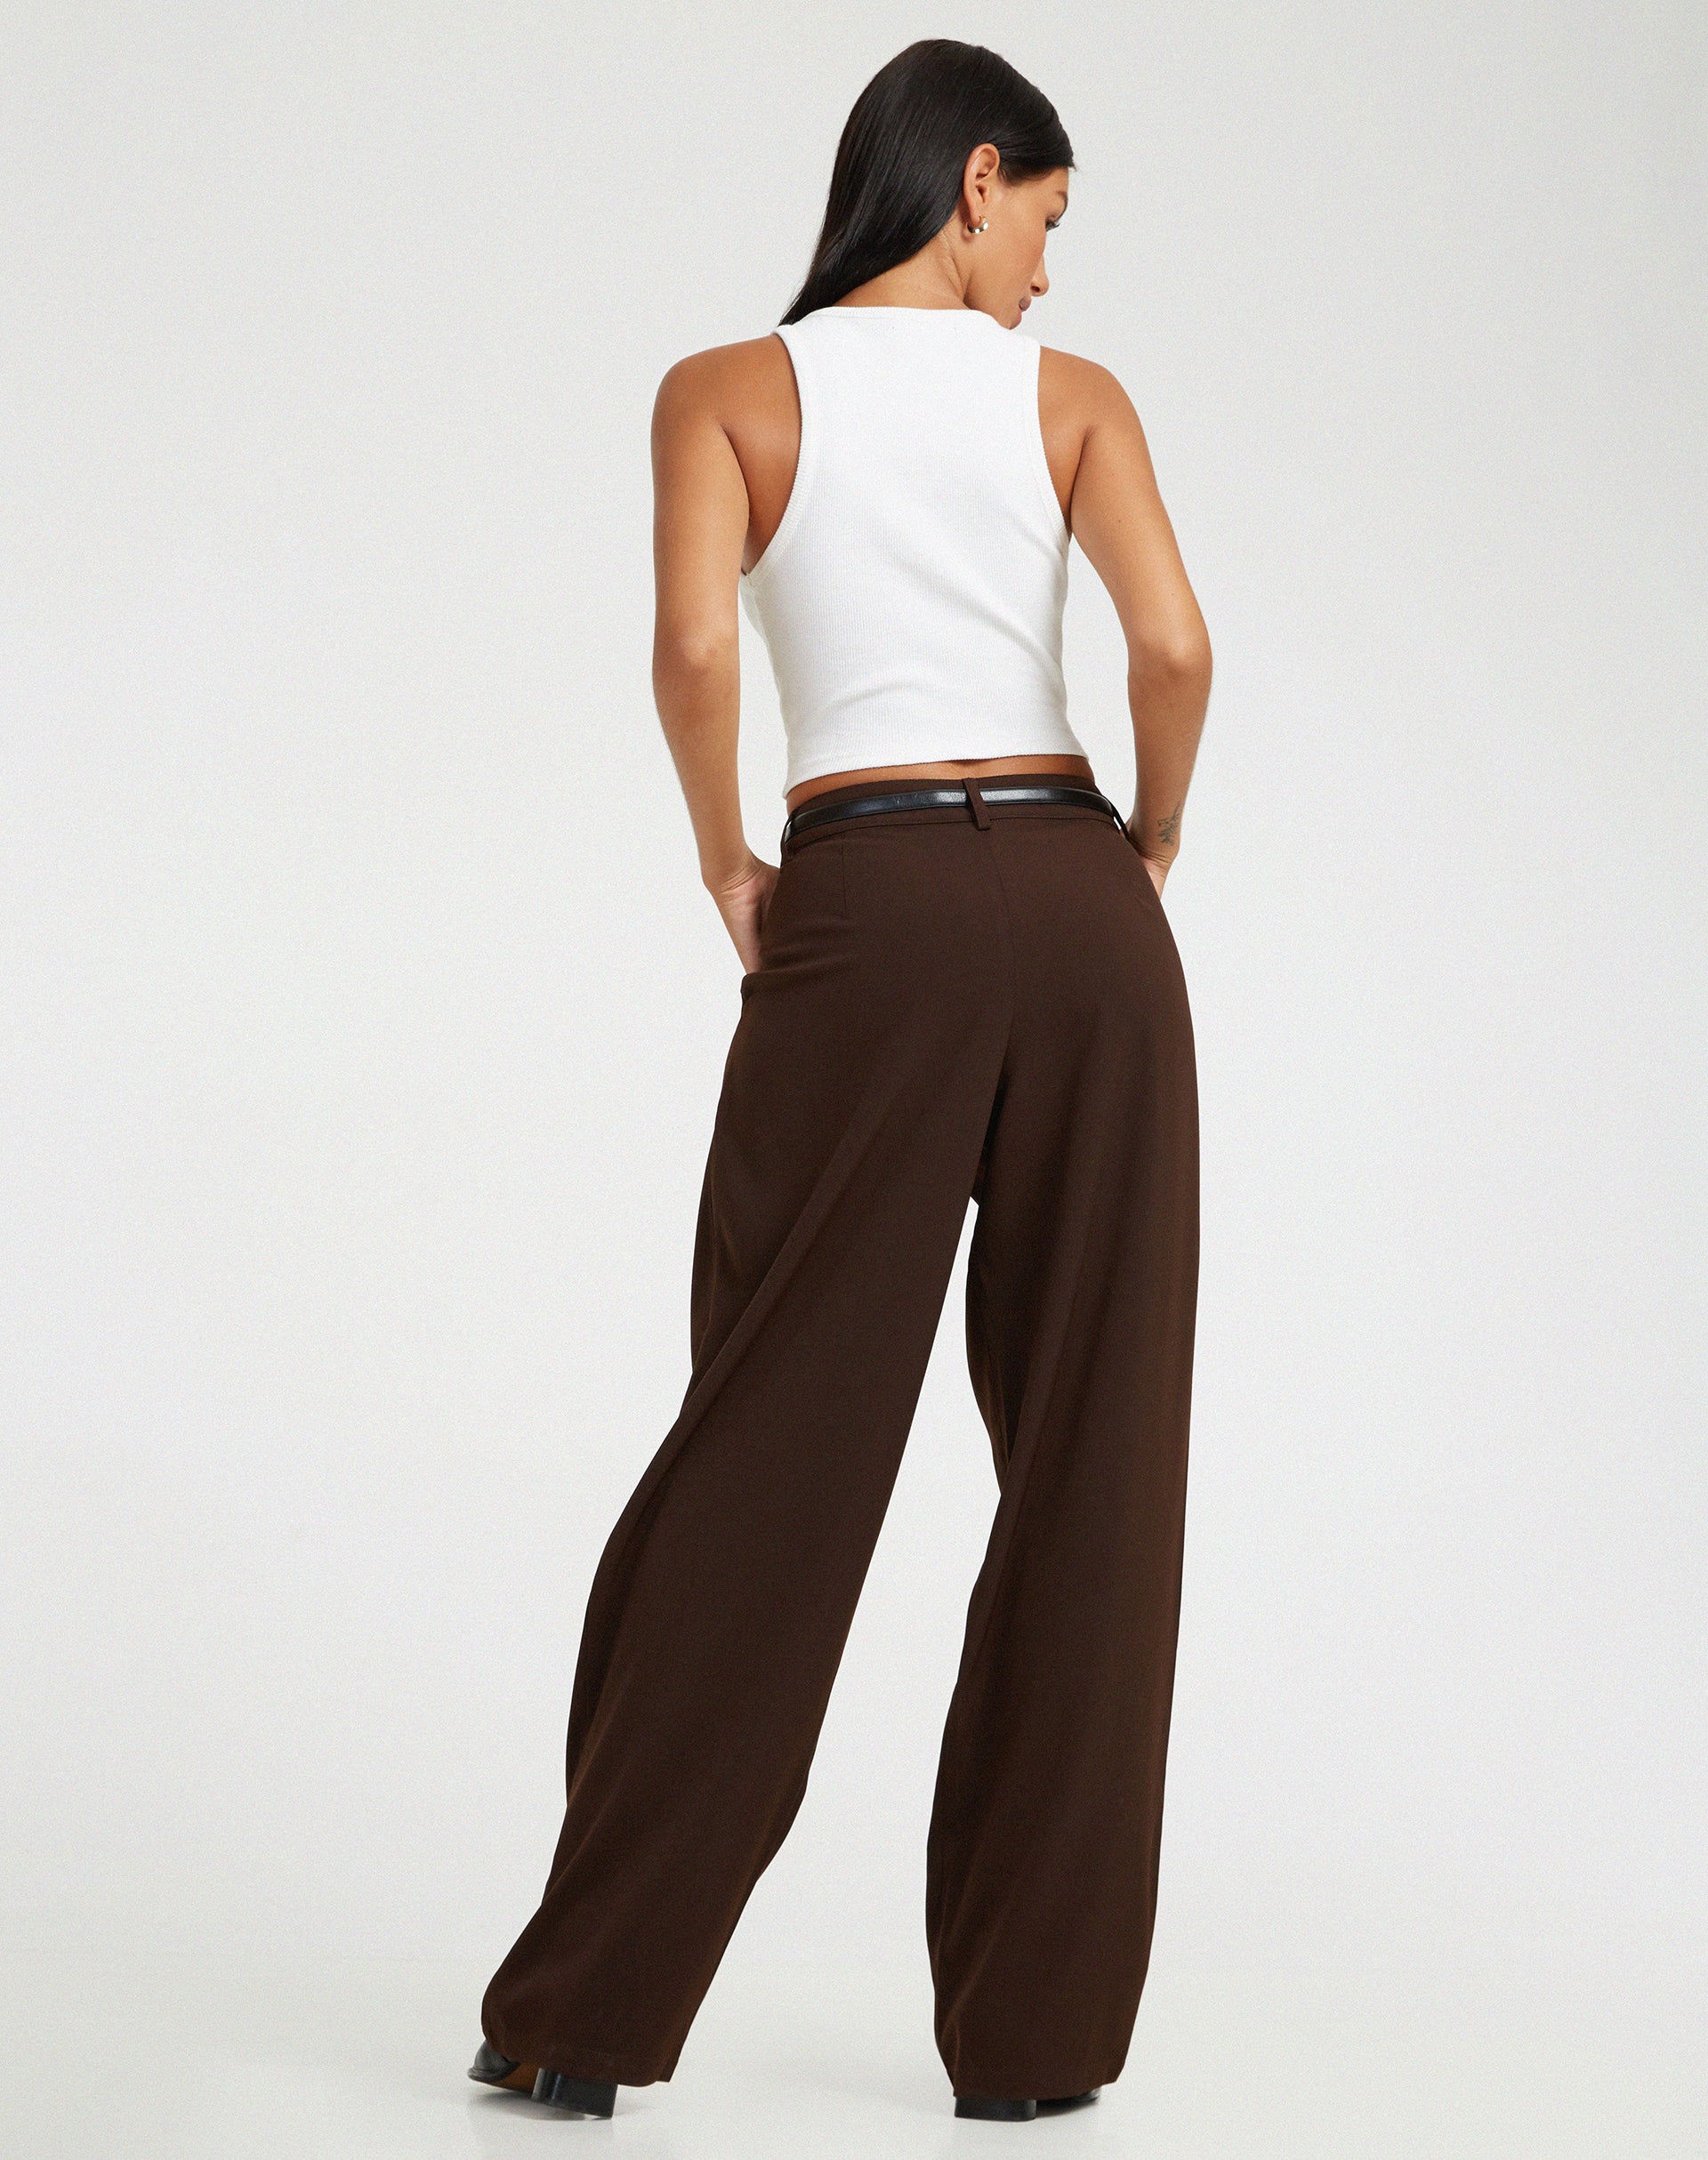 image of Sabara Trouser in Tailoring Cappuccino